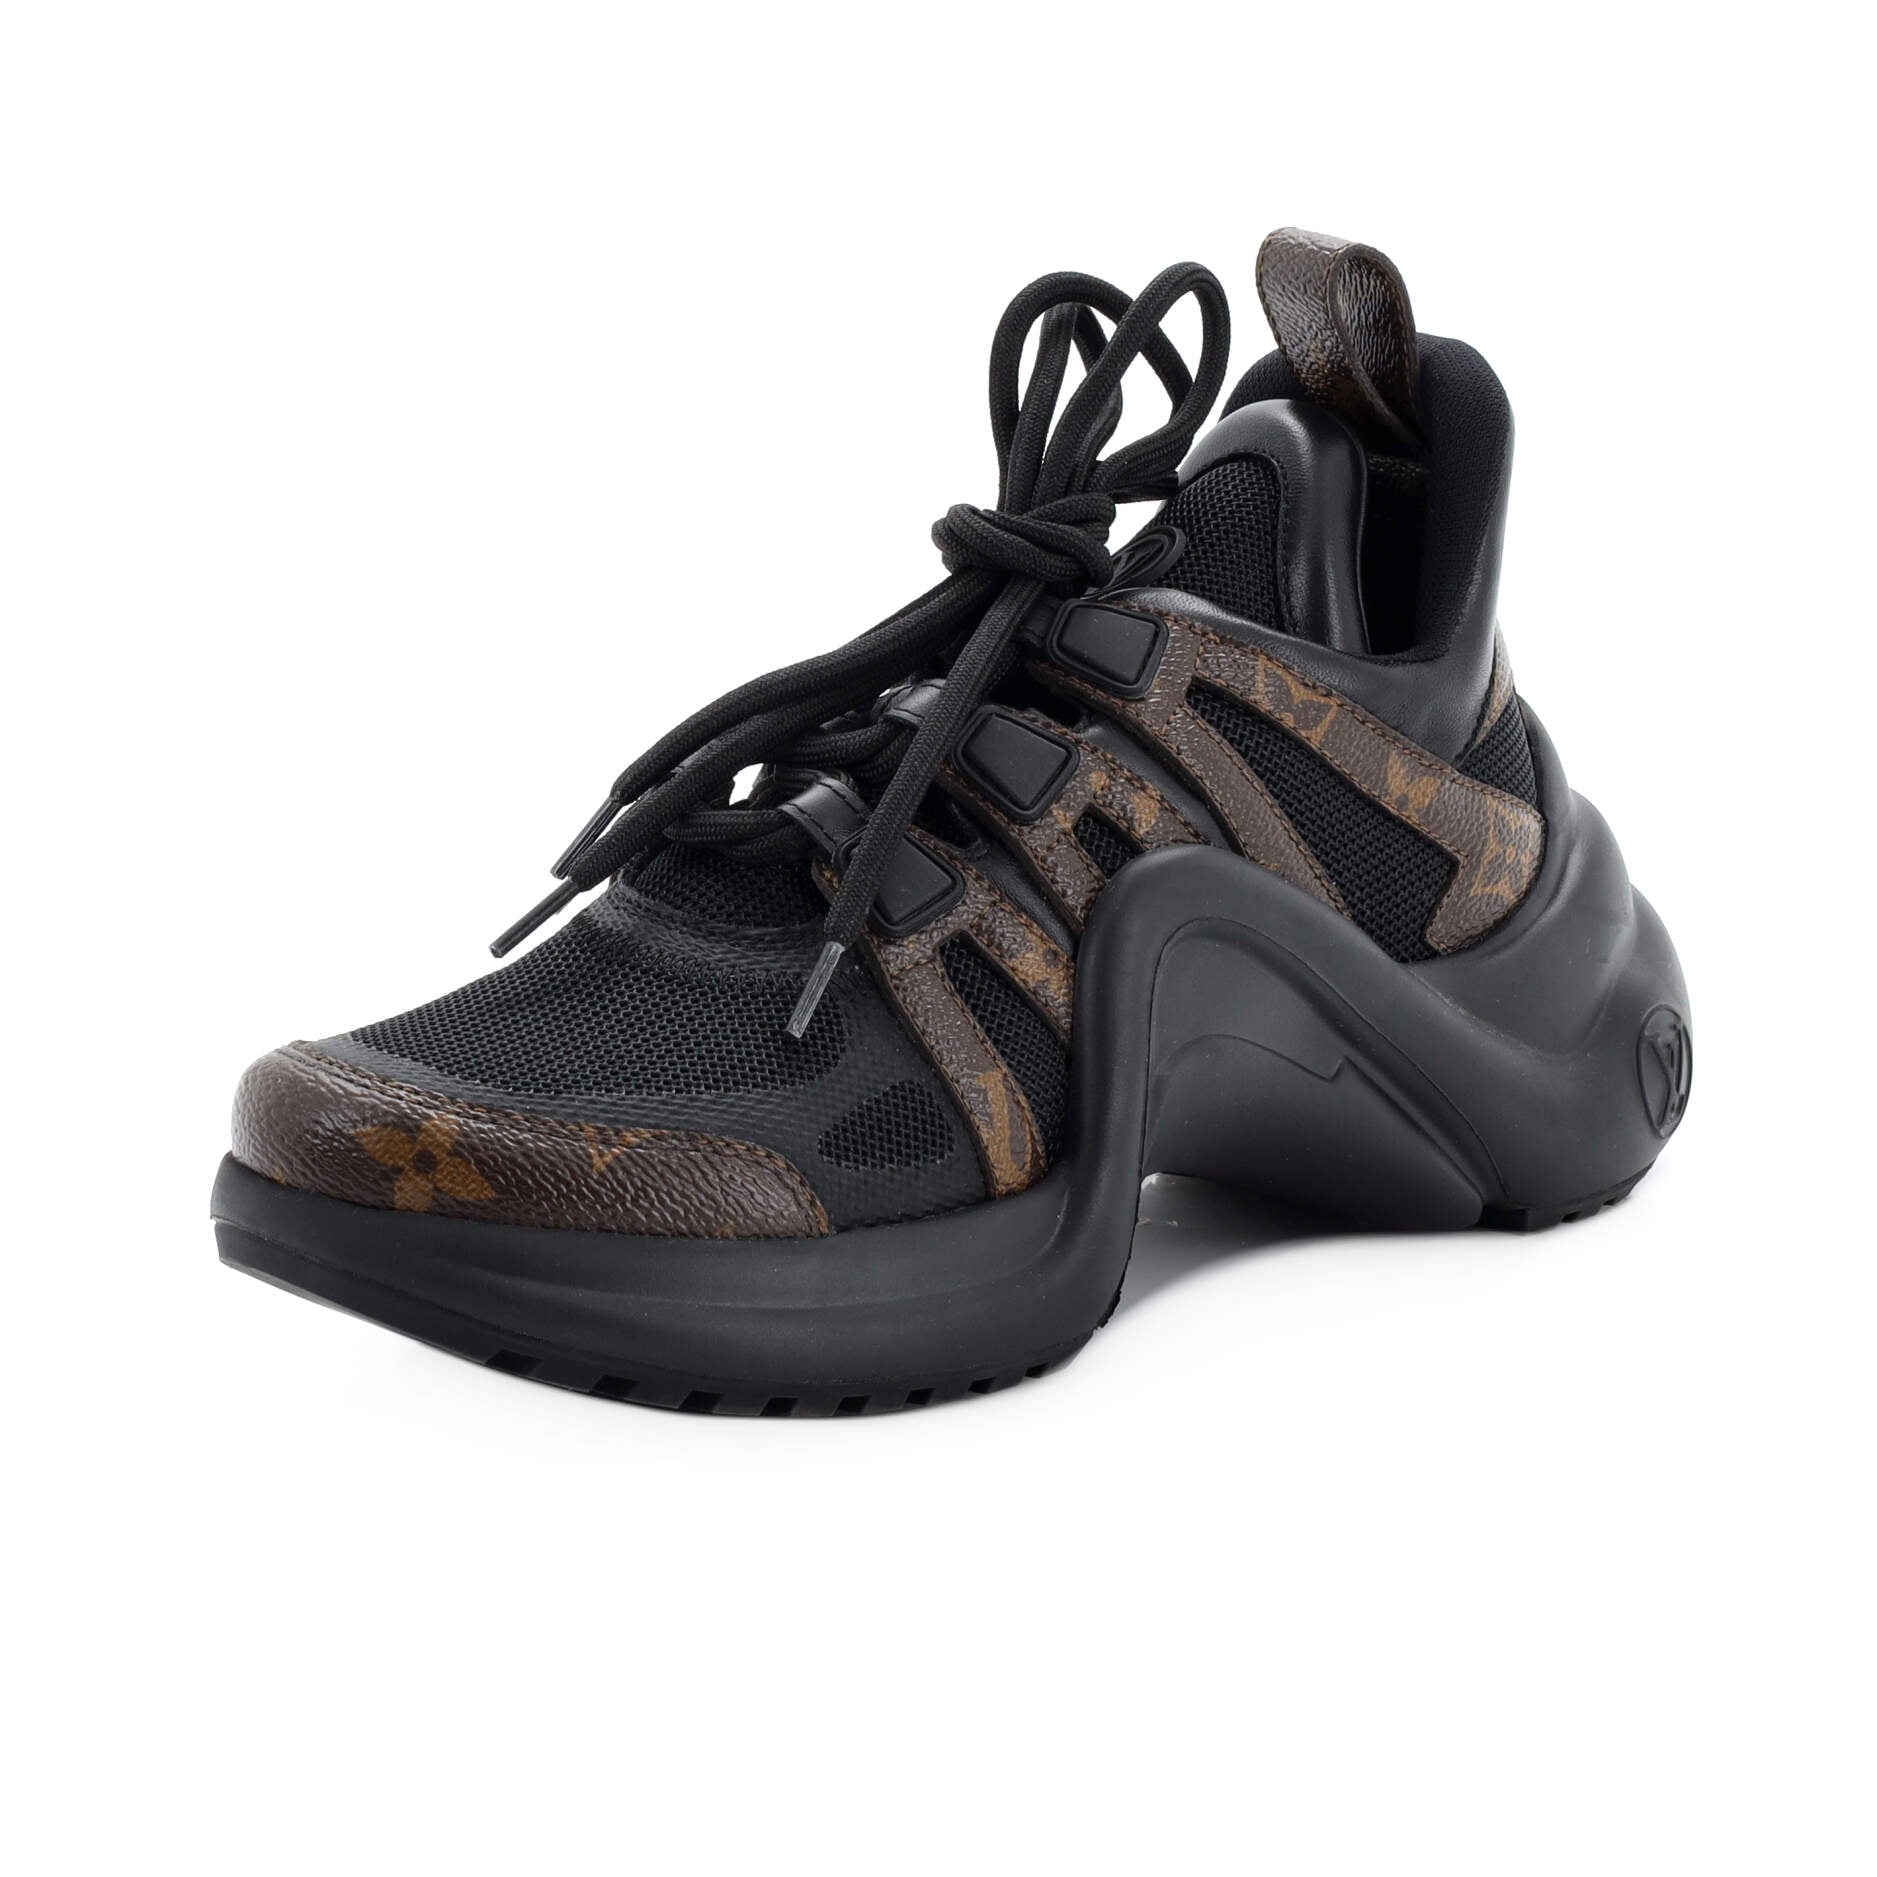 Louis Vuitton Women's Archlight Sneakers Fabric and Leather - ShopStyle